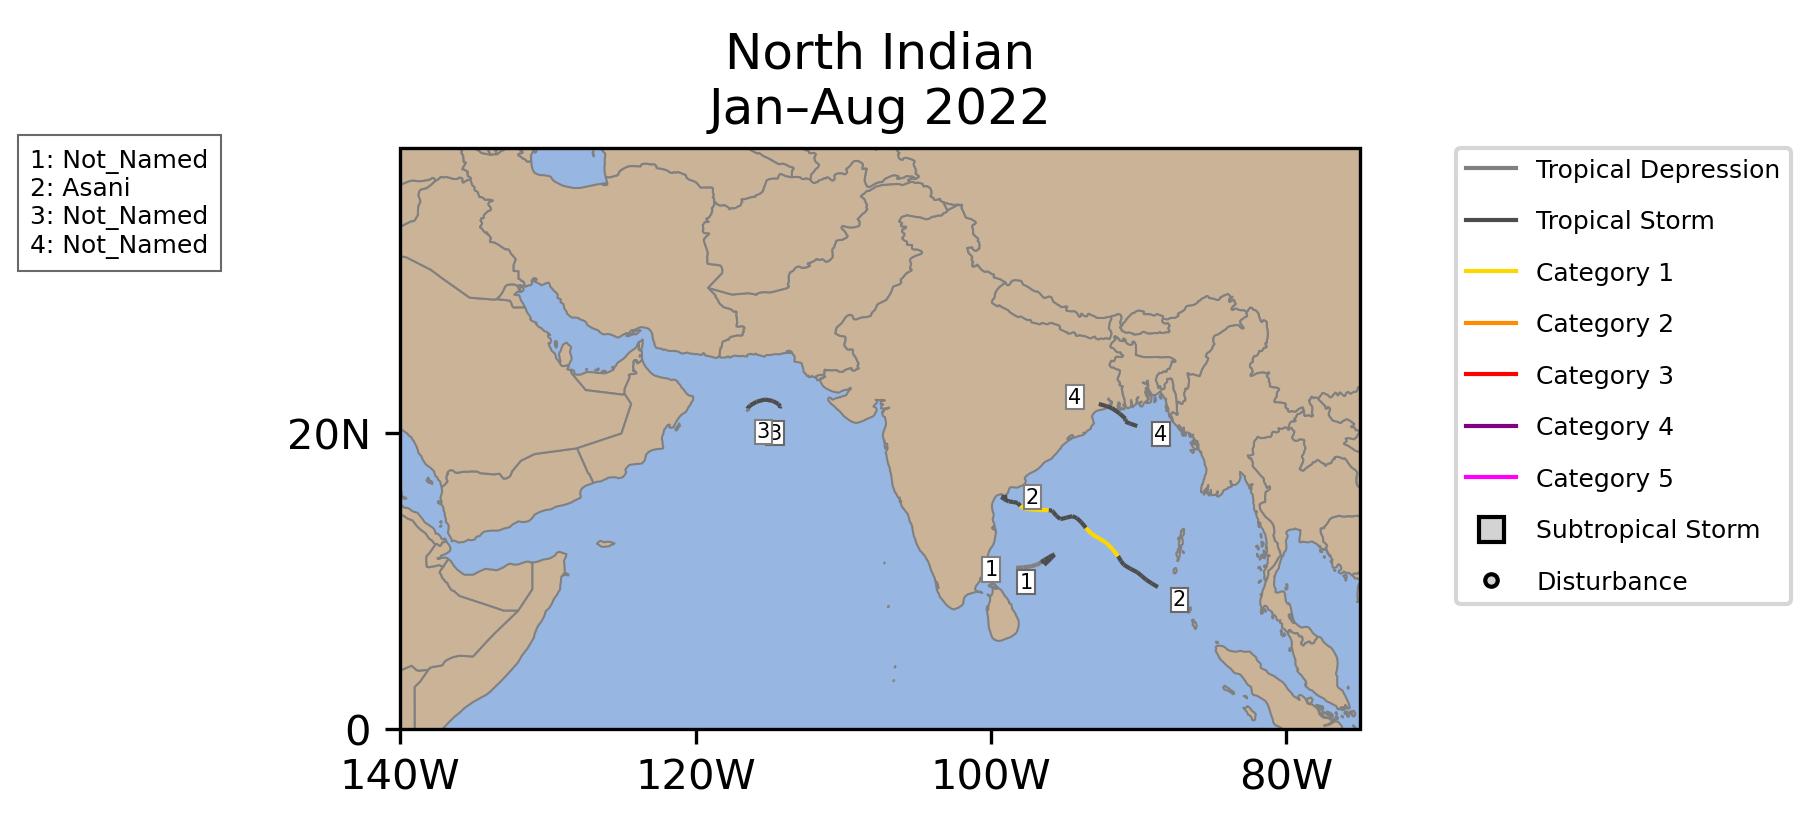 North Indian Tropical Cyclone Storm Tracks January-August 2022